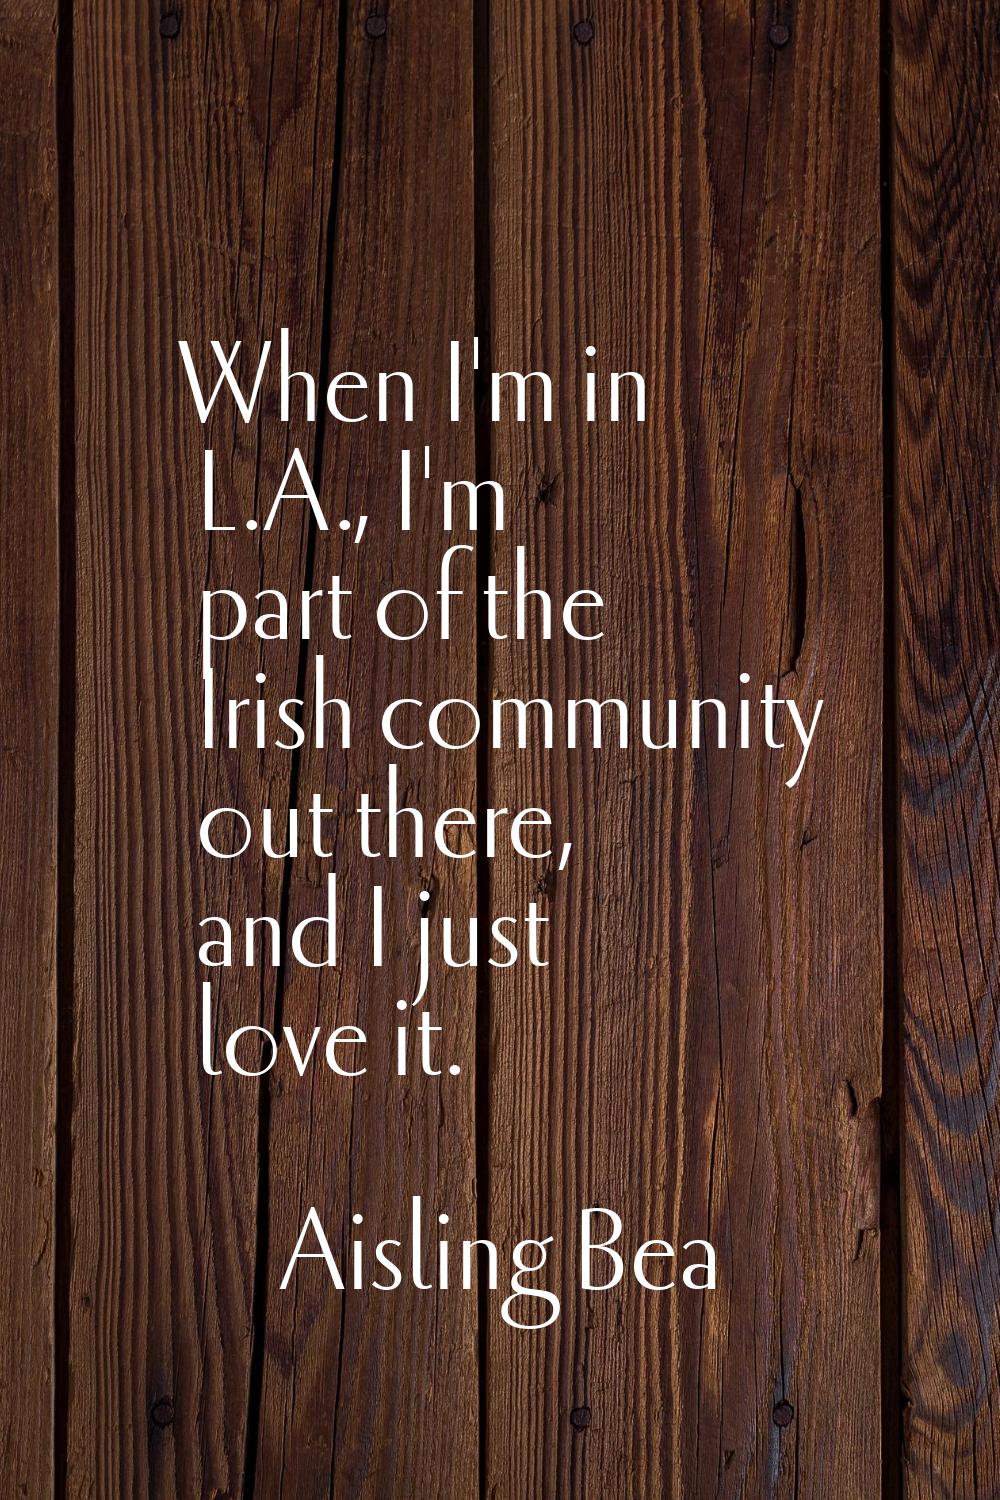 When I'm in L.A., I'm part of the Irish community out there, and I just love it.